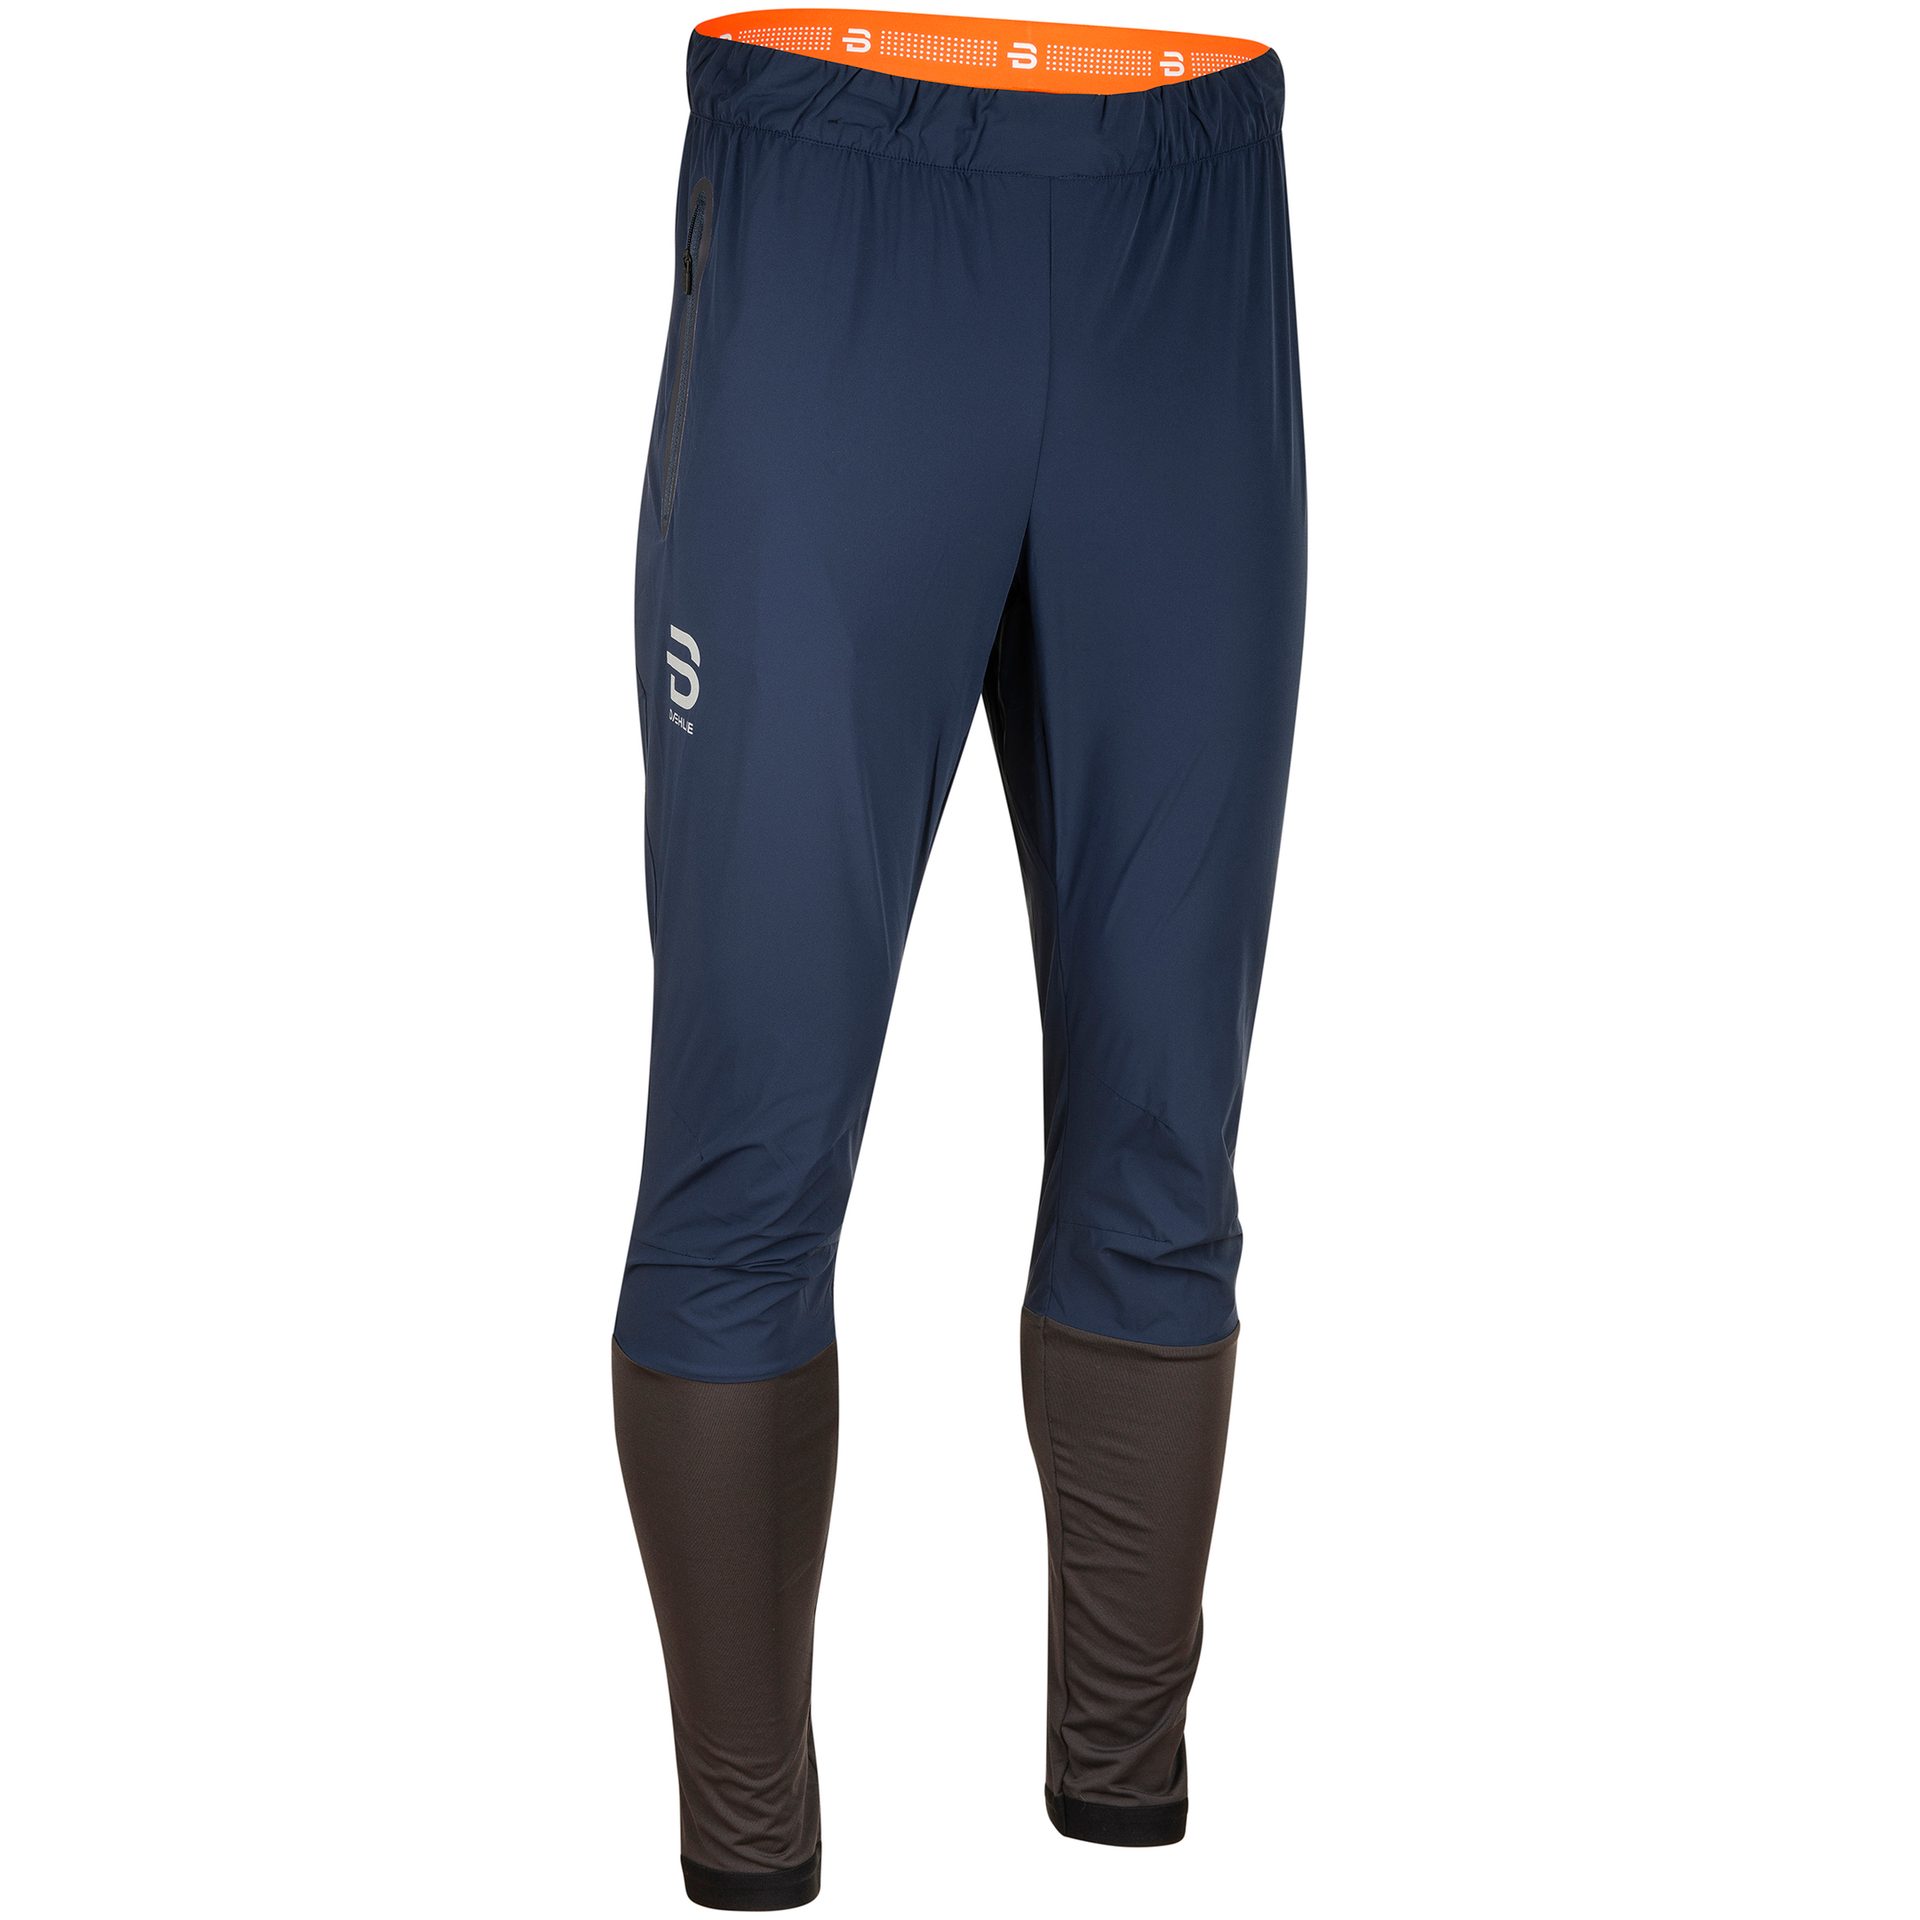 Active pants, Trousers, Outerwear, Sleeve, Gesture, Thigh, Knee, Sportswear, Waist